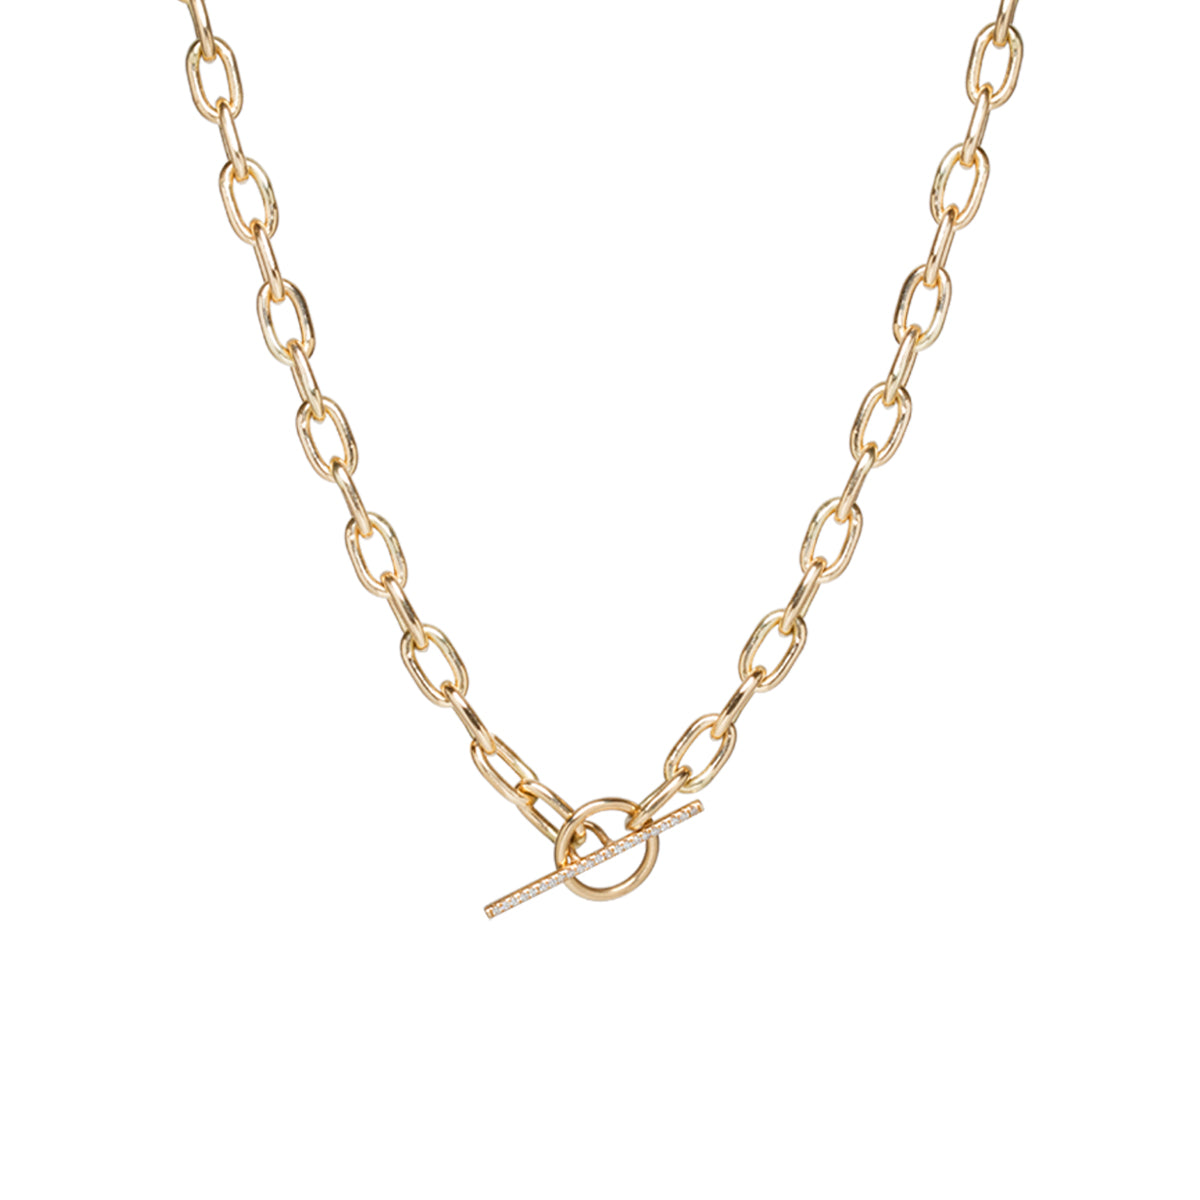 Graduated Knife Edge Oval Link Chain Necklace by Lizzie Mandler - NEWTWIST